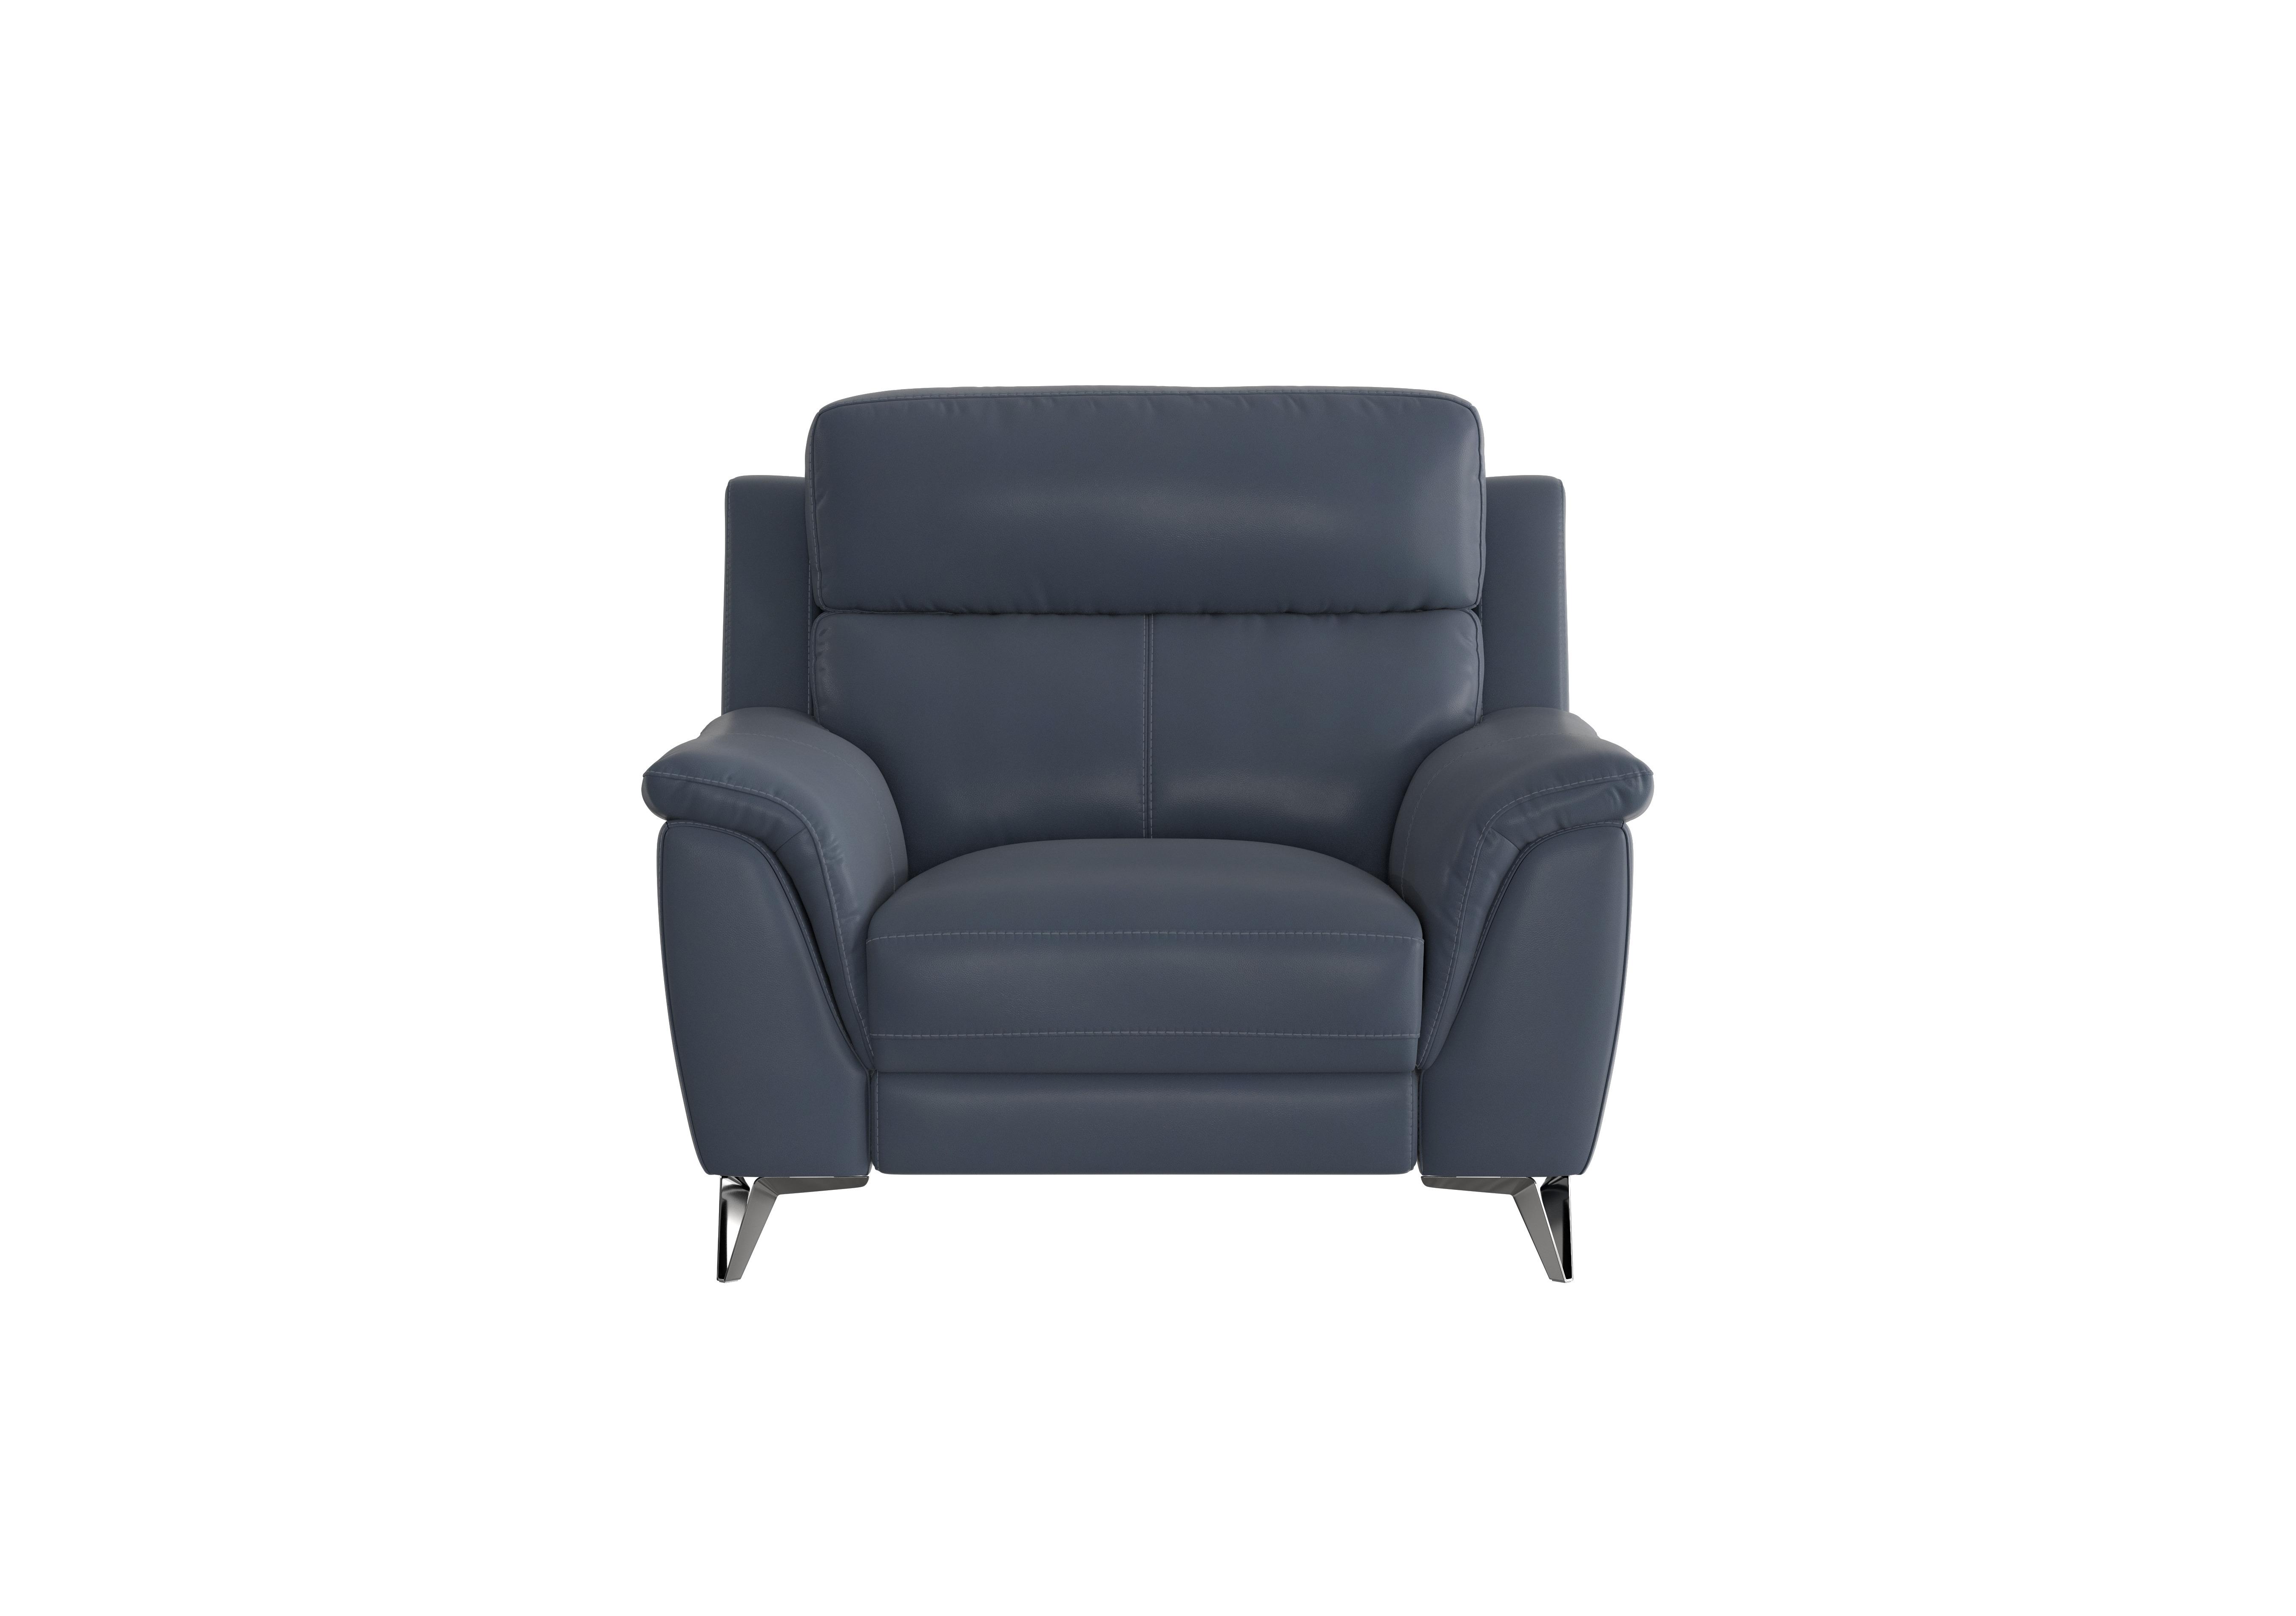 Contempo Leather Armchair in Bv-313e Ocean Blue on Furniture Village